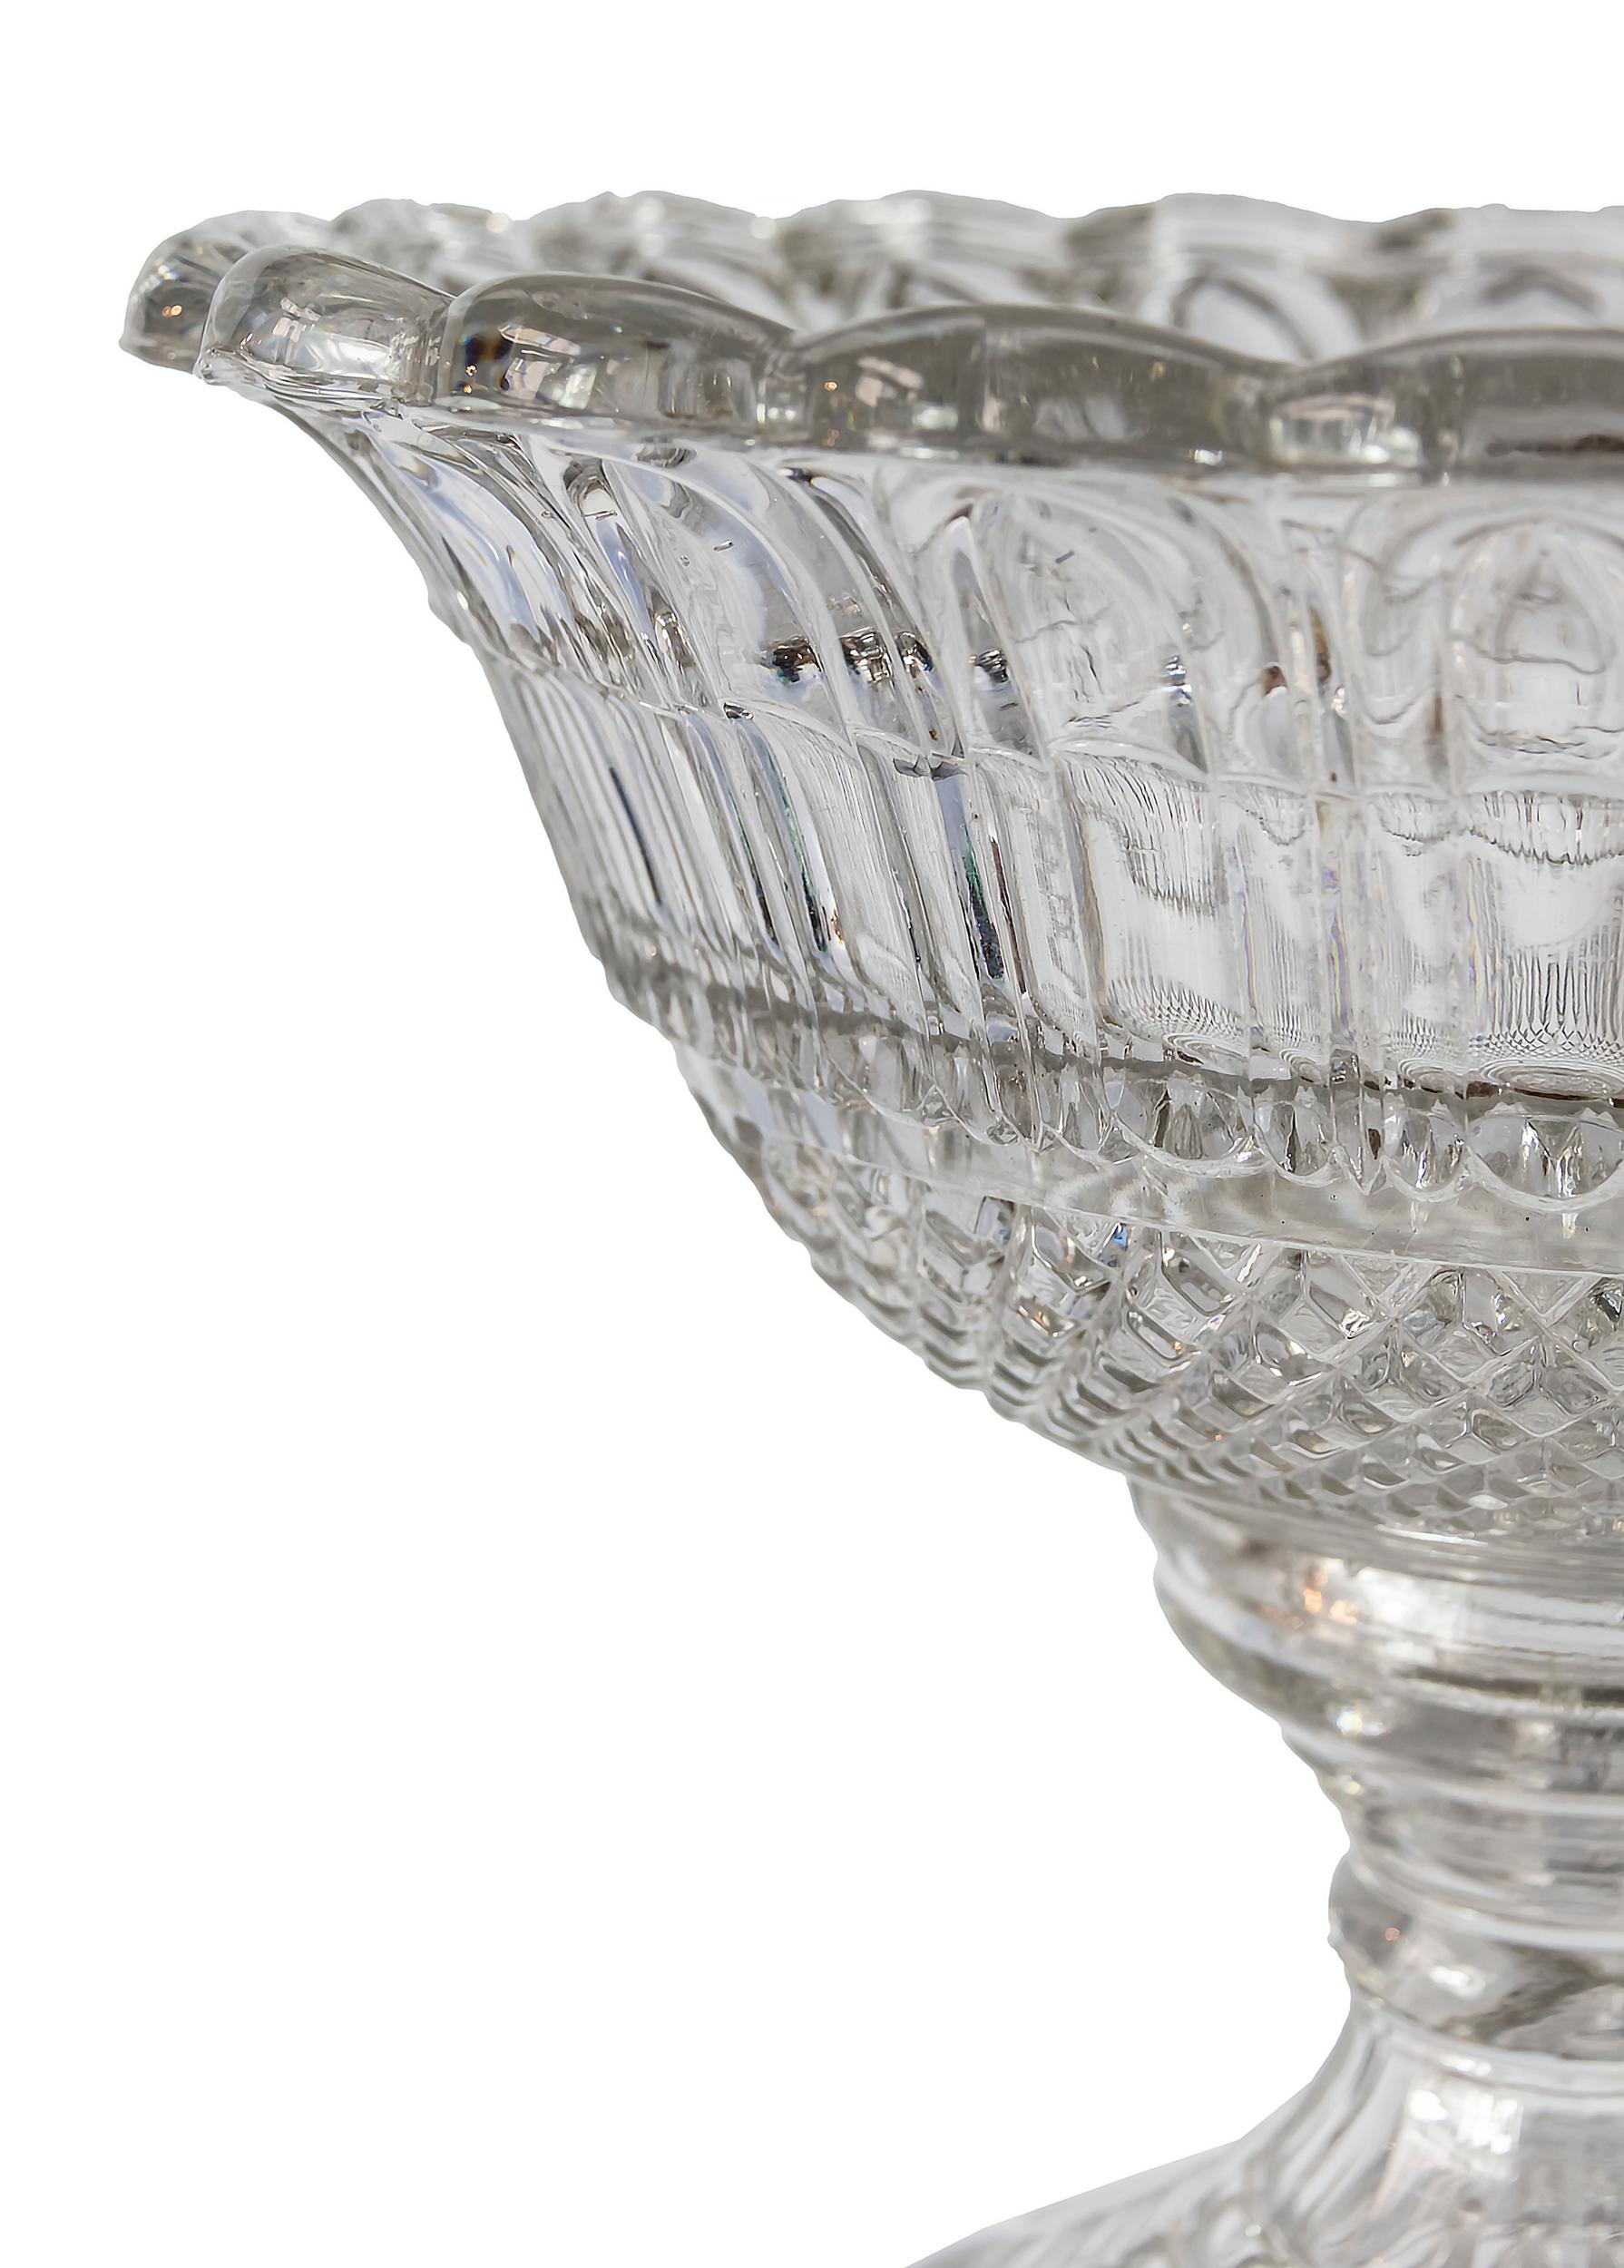 Hand-Crafted Extra Large French Handmade Crystal Glass Vase Centerpiece, circa 1920's